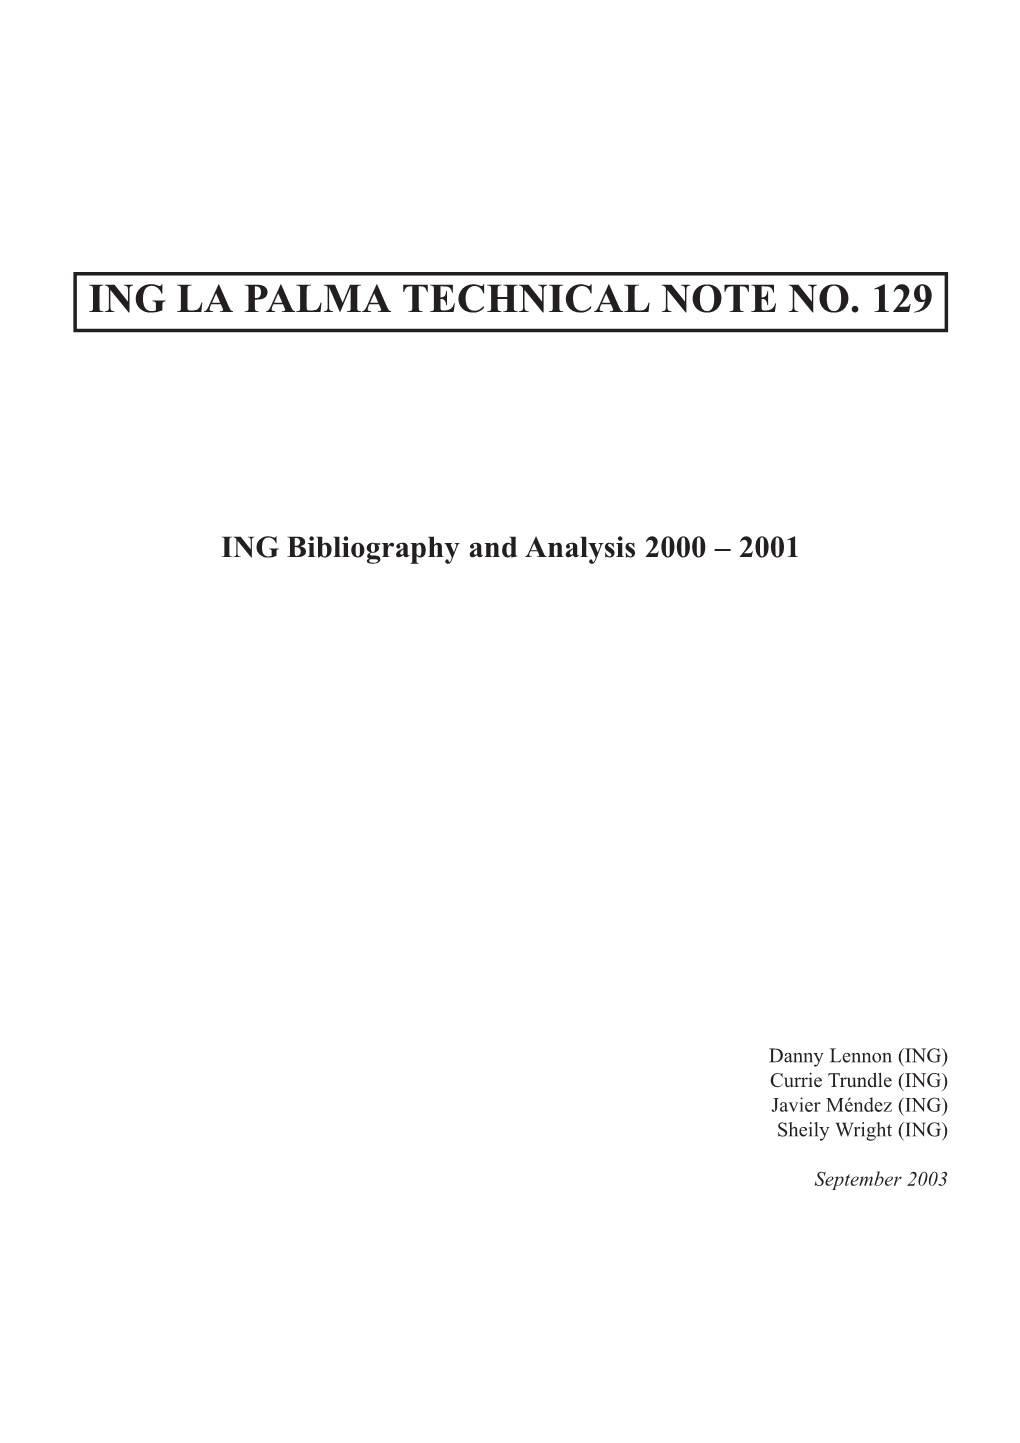 Technical Note No. 129